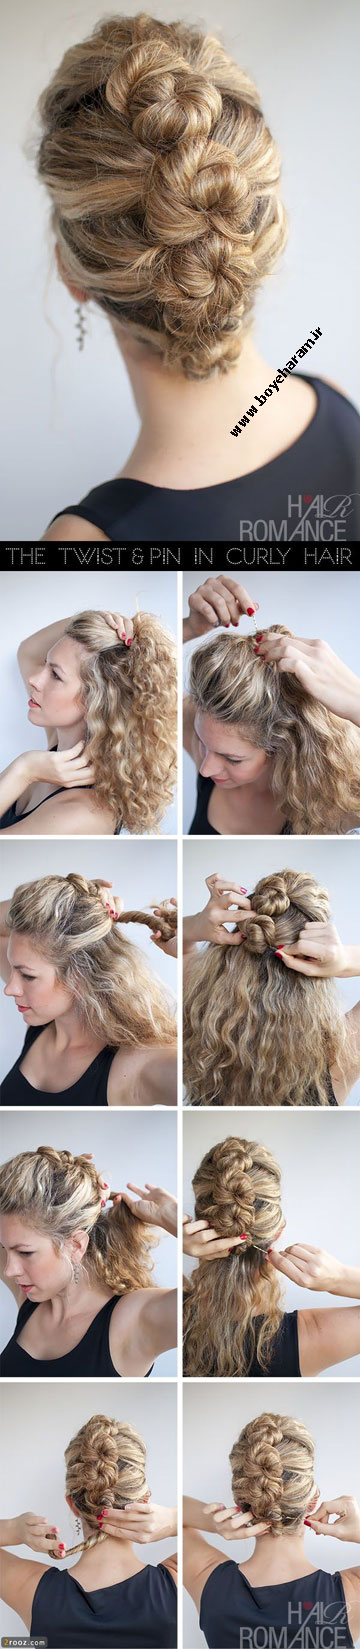 hairstyle-tutorial